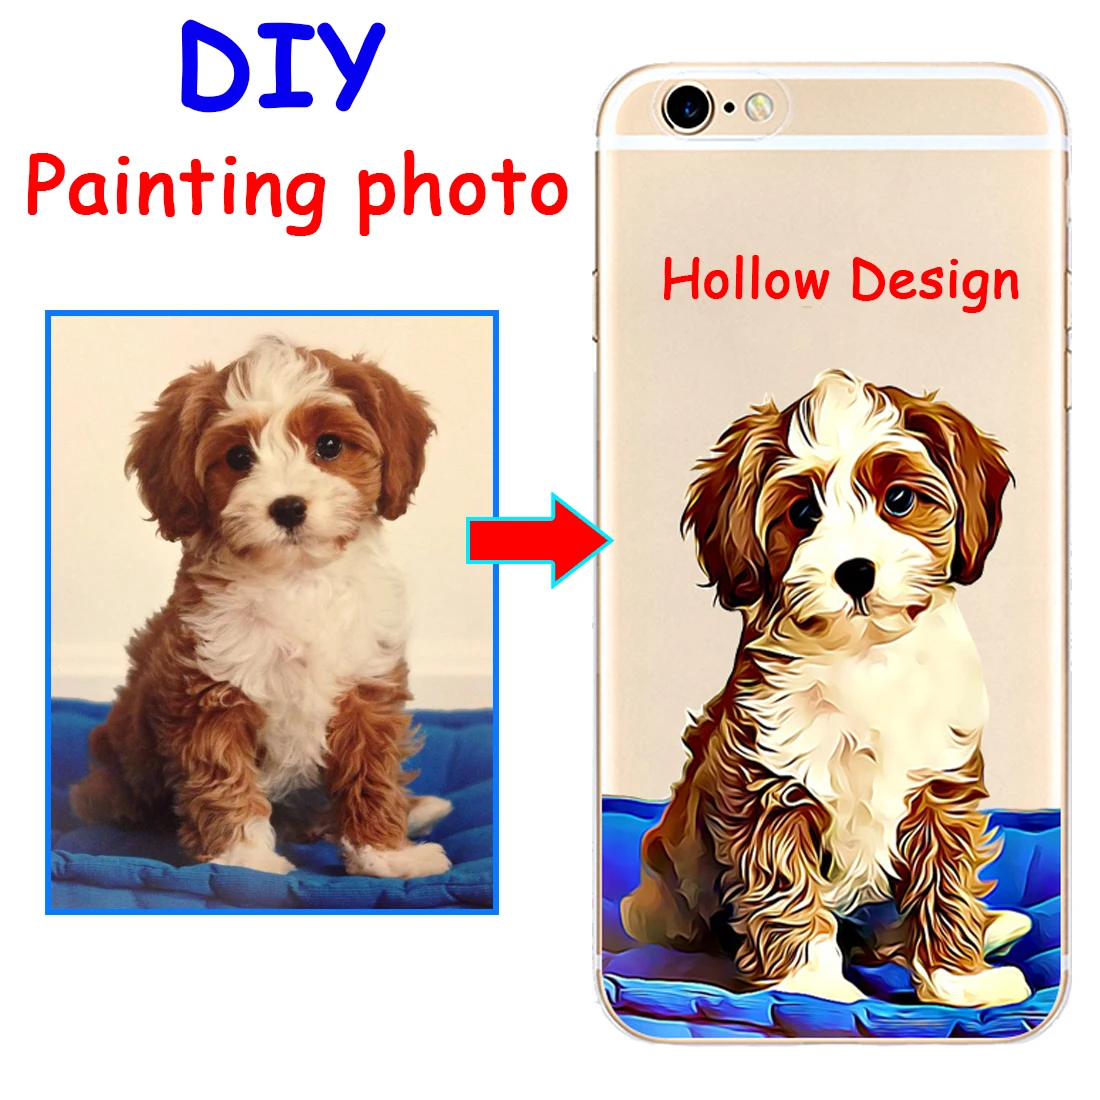 

Custom Illustrated Hand Drawn Dog Hollow Soft Phone Case Cover For Iphone 13 12 Pro Mini 11Pro Max Se2 6s 7 8 plus X XS XR Xsmax